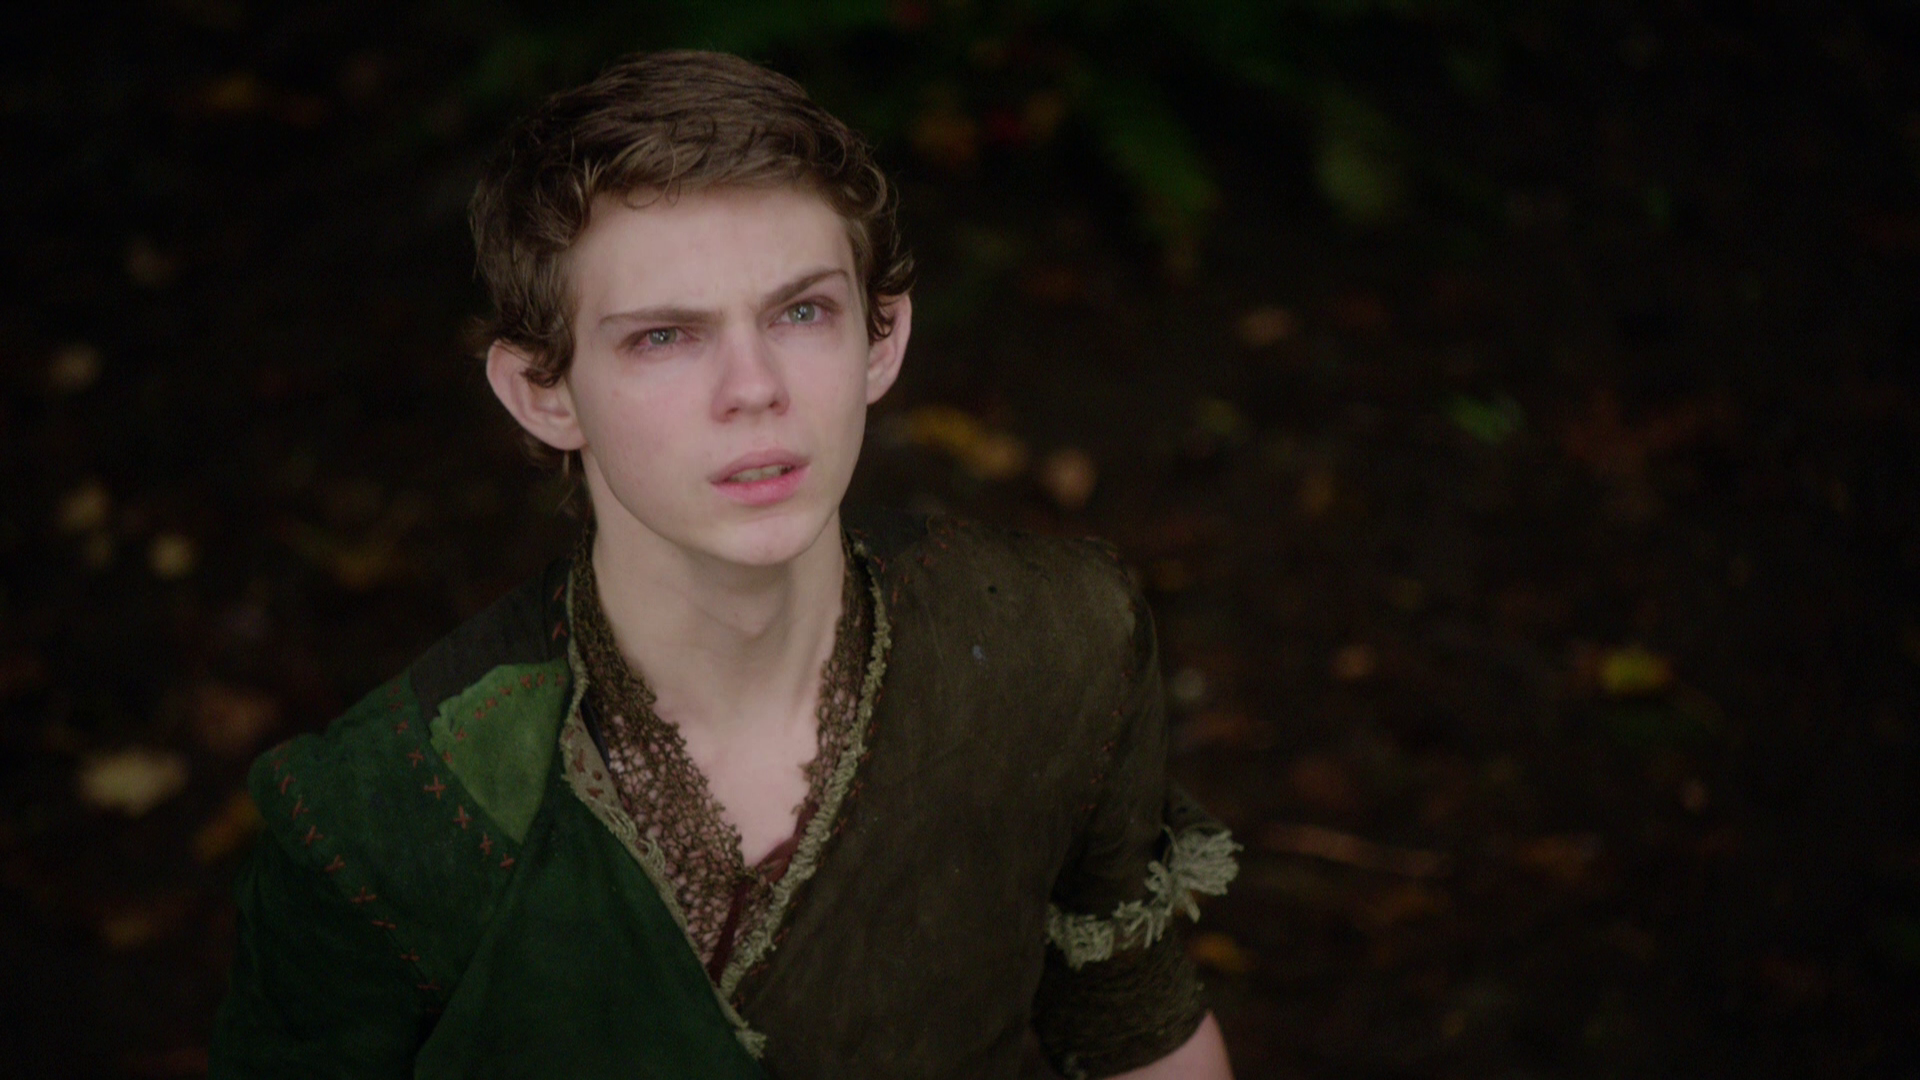 Pan' Goes Back to the 111-Year Old Peter Pan Story